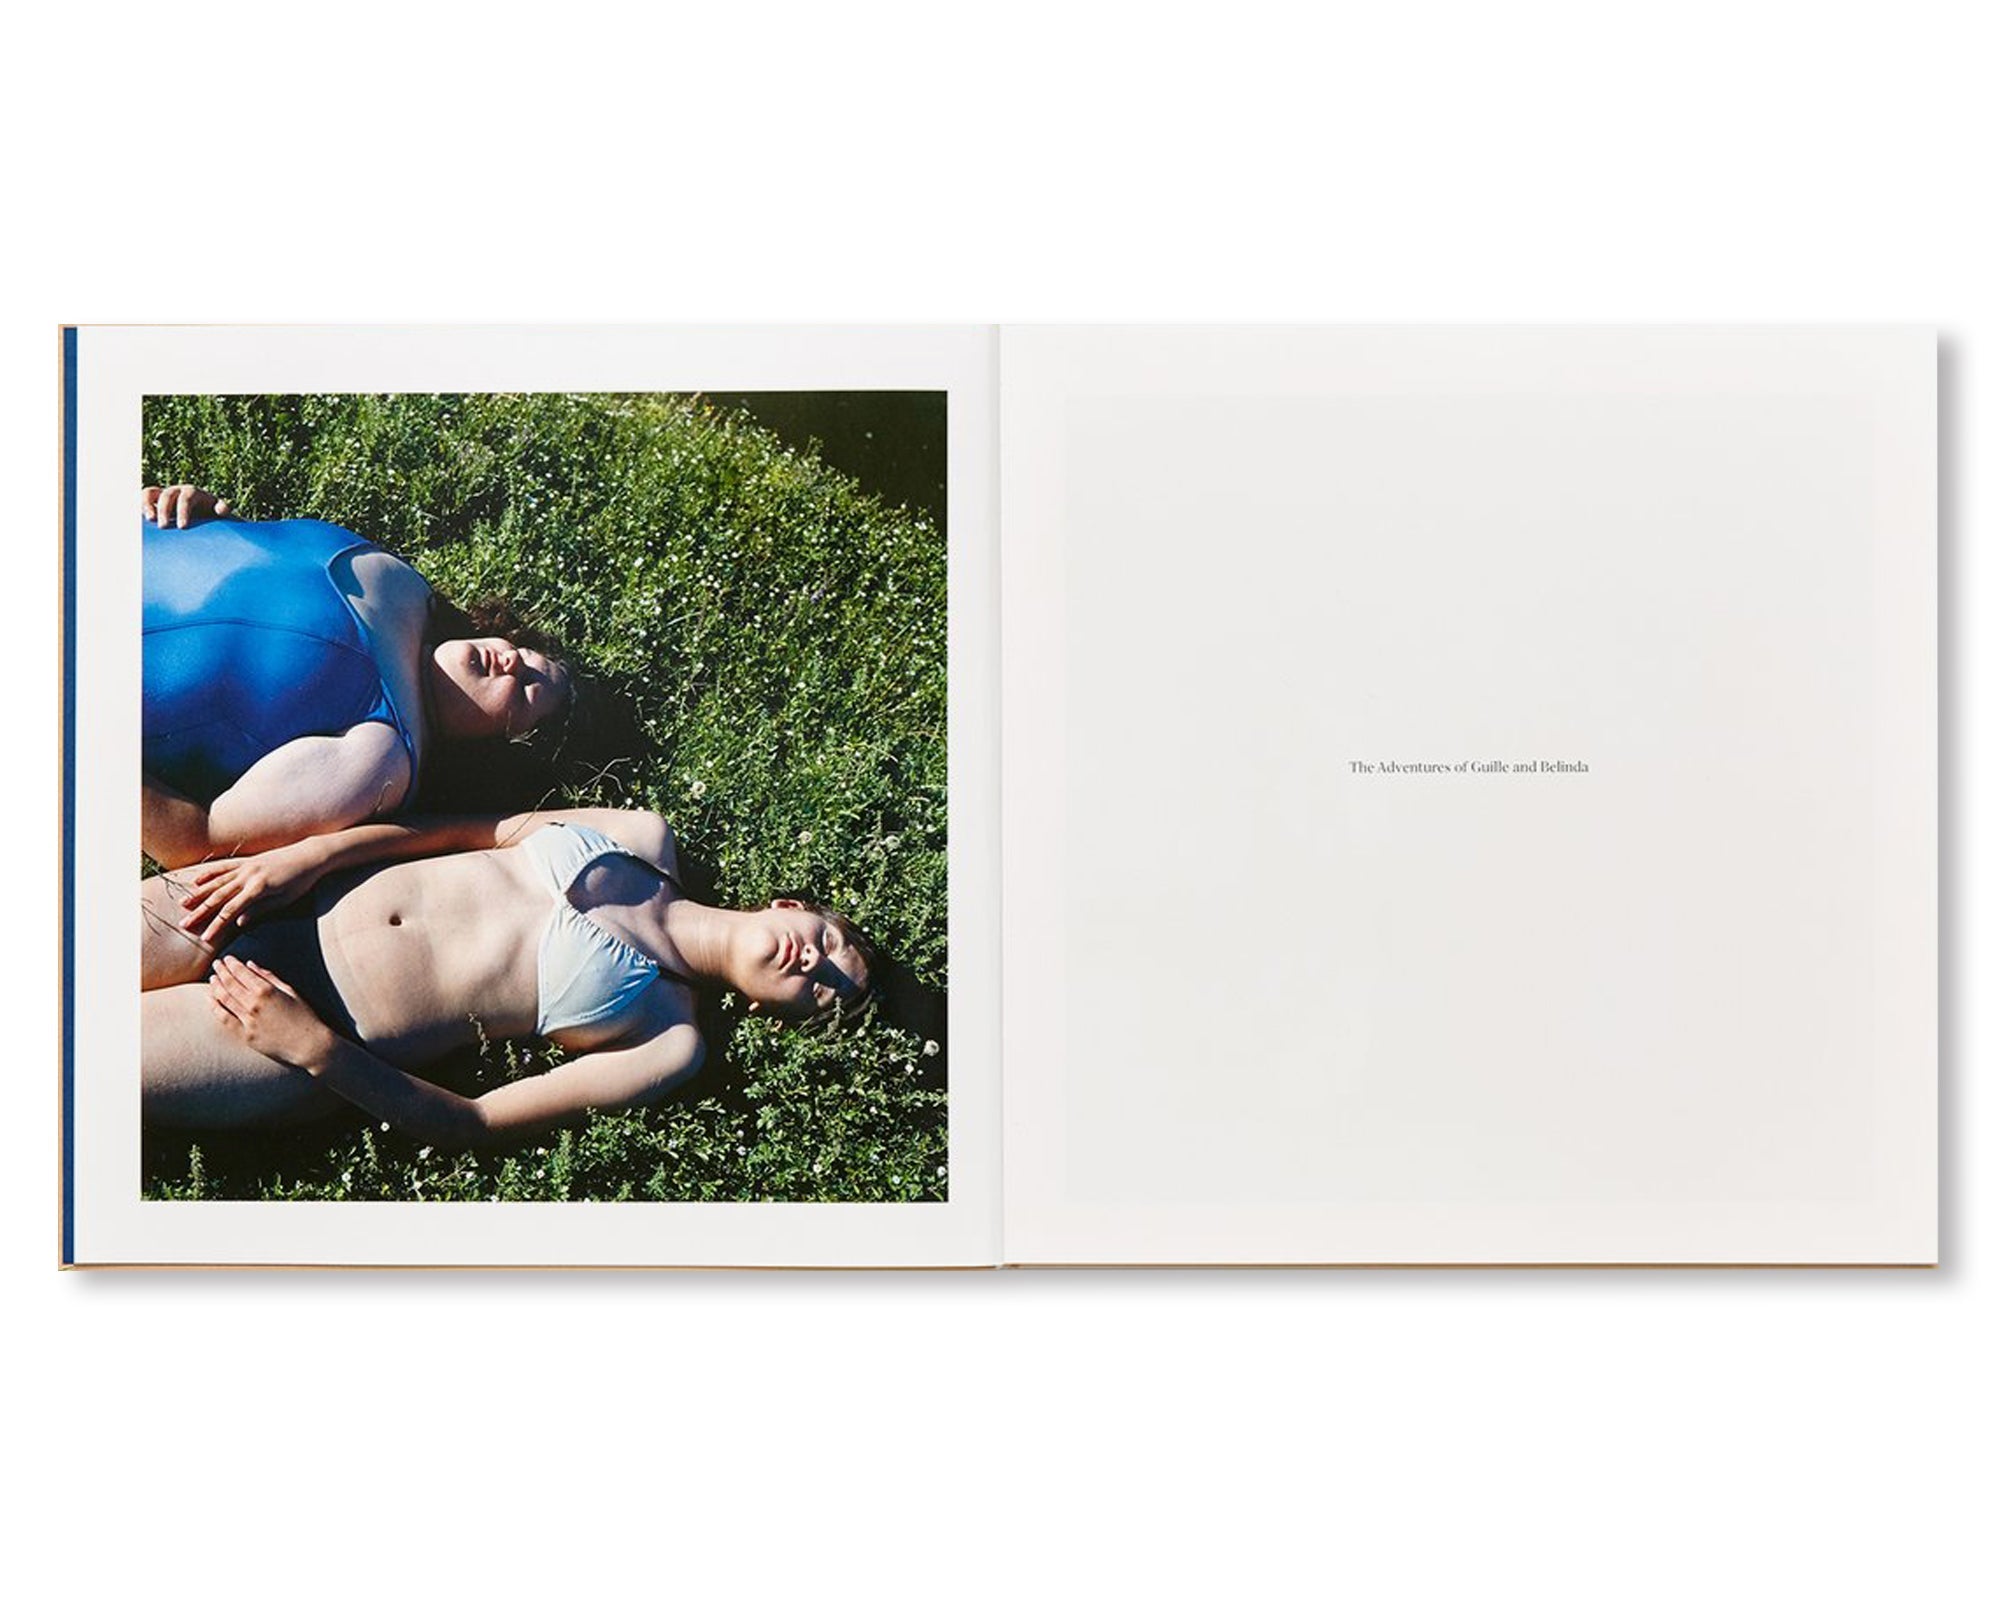 THE ADVENTURES OF GUILLE AND BELINDA AND THE ILLUSION OF AN EVERLASTING SUMMER by Alessandra Sanguinetti